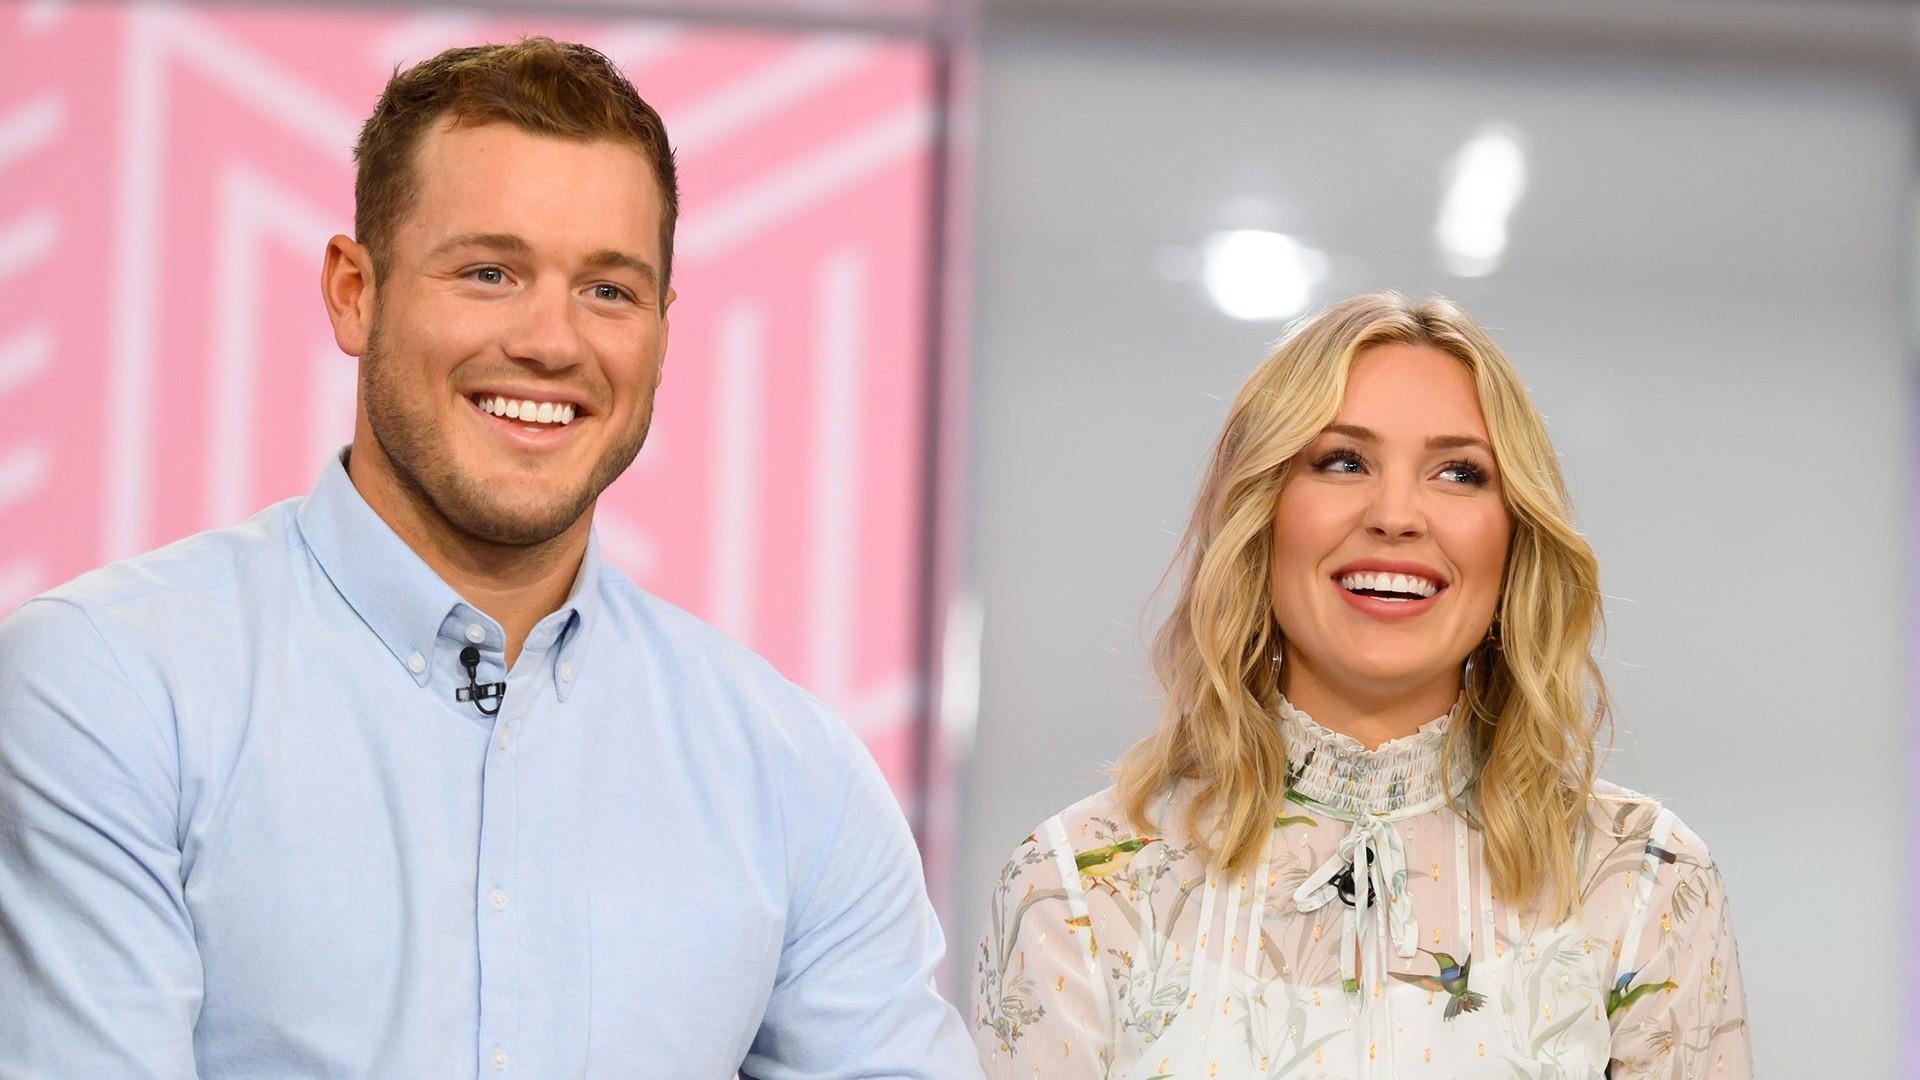 ‘Bachelor’ Star Colton Underwood Comes Out as Gay